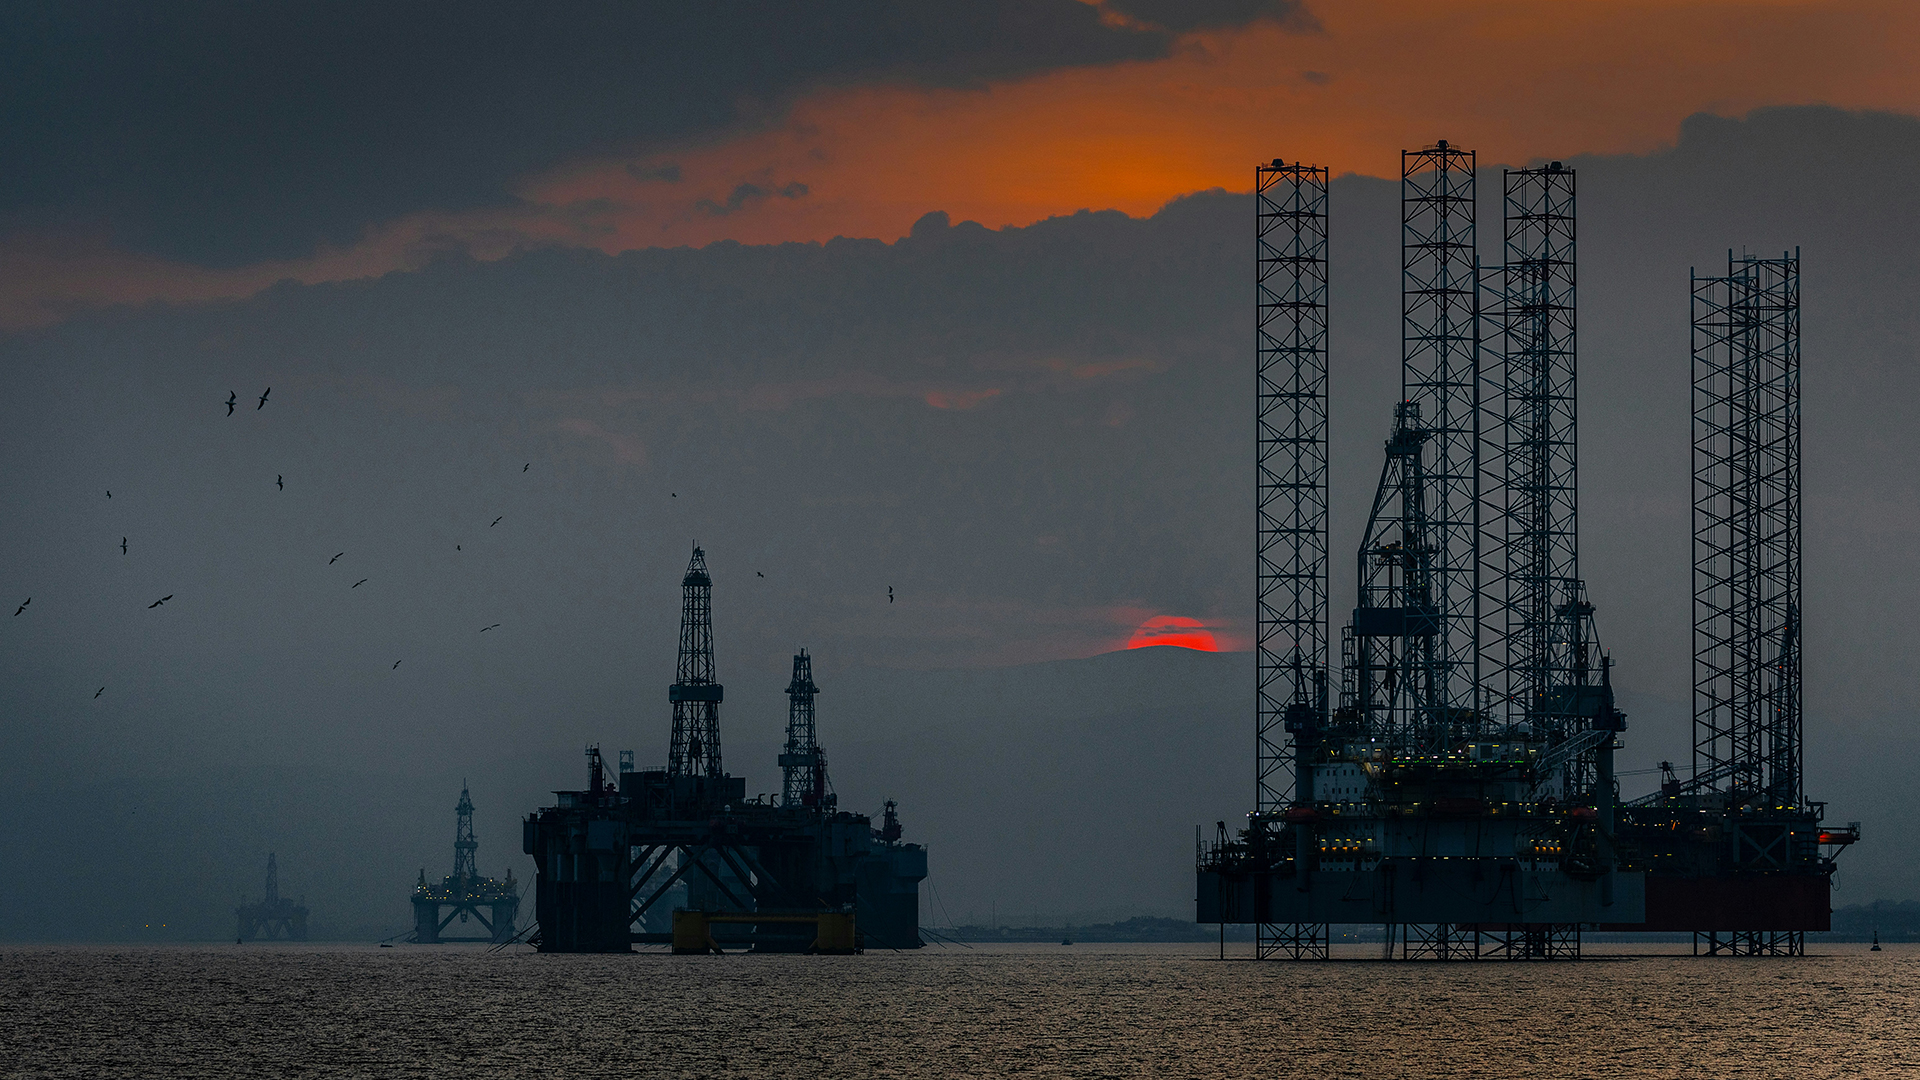 Oil rigs in the sunset